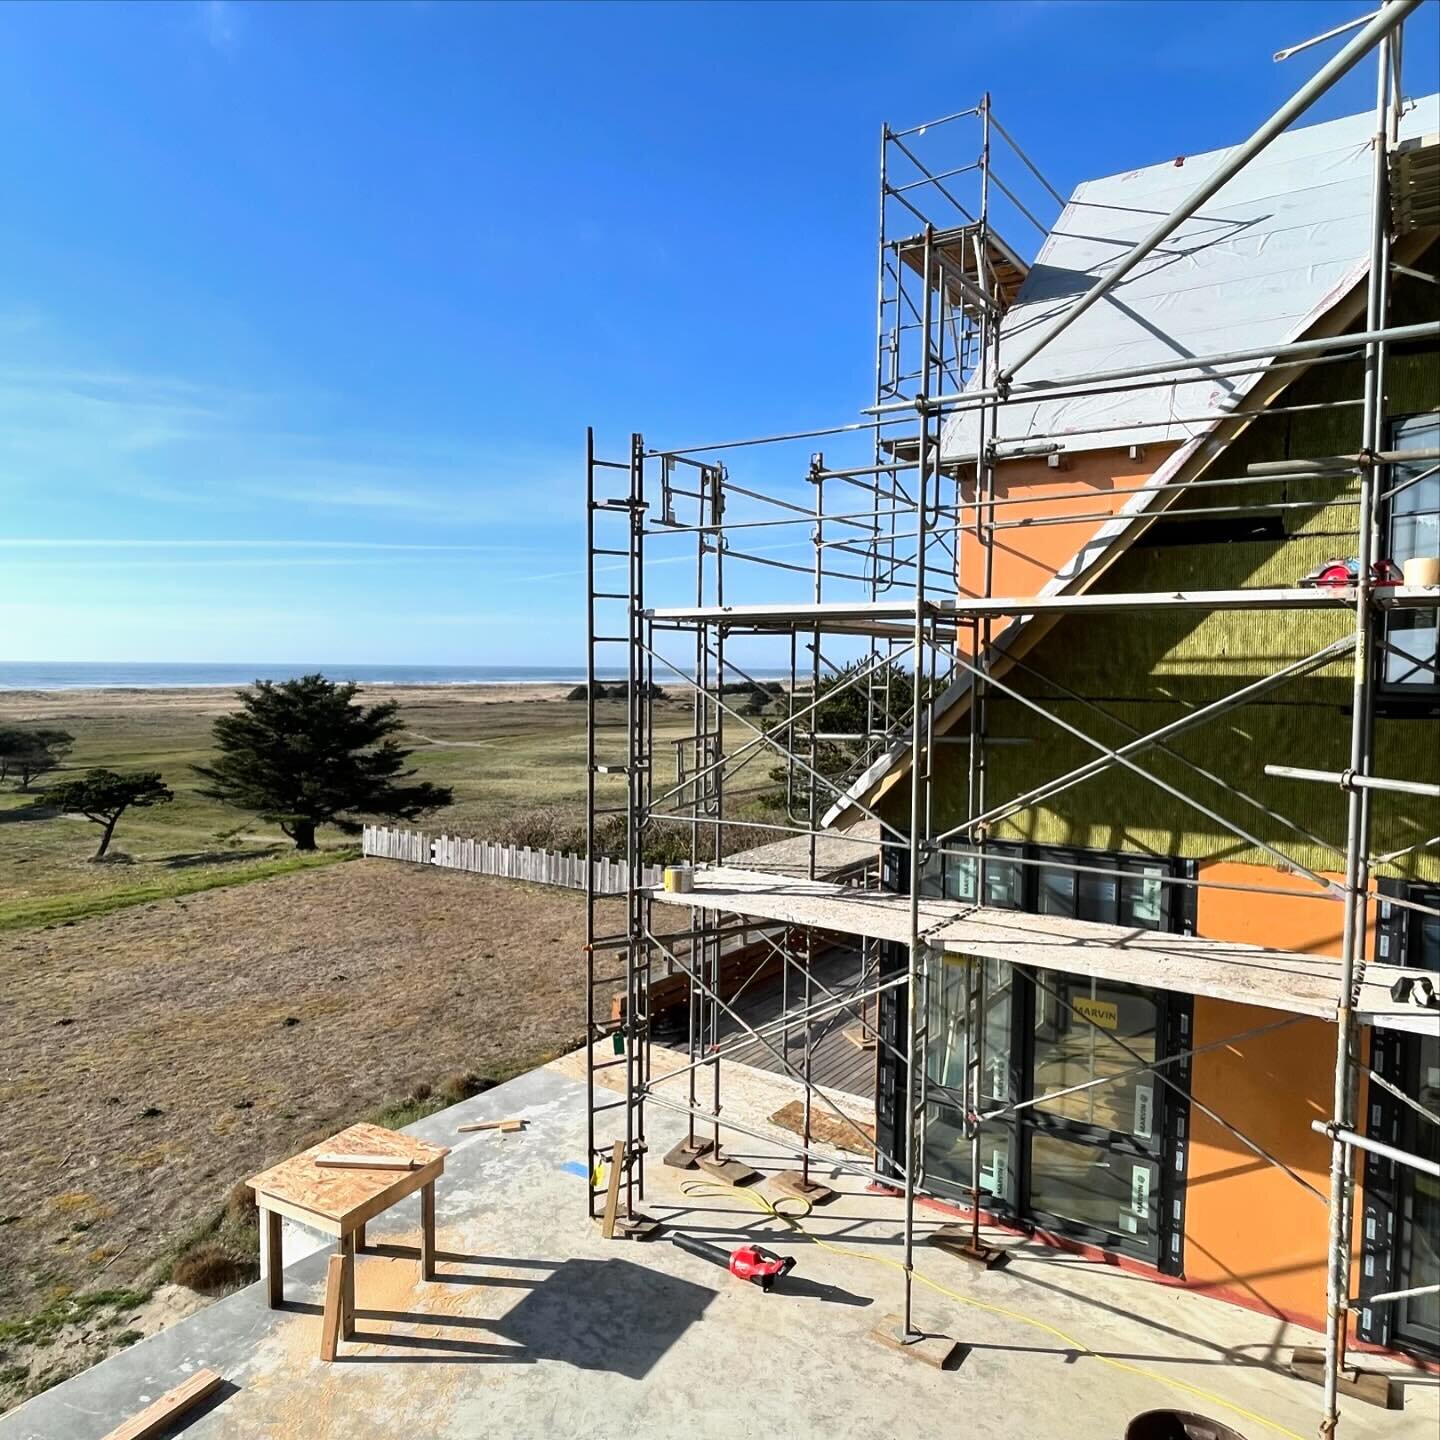 Site visit to a residential project under construction in a small town in the Pacific Northwest. #coastaloregon #customresidentialarchitecture #constructionprogress #oregonbeachhouse #reidarchitecture #tillamookpoint